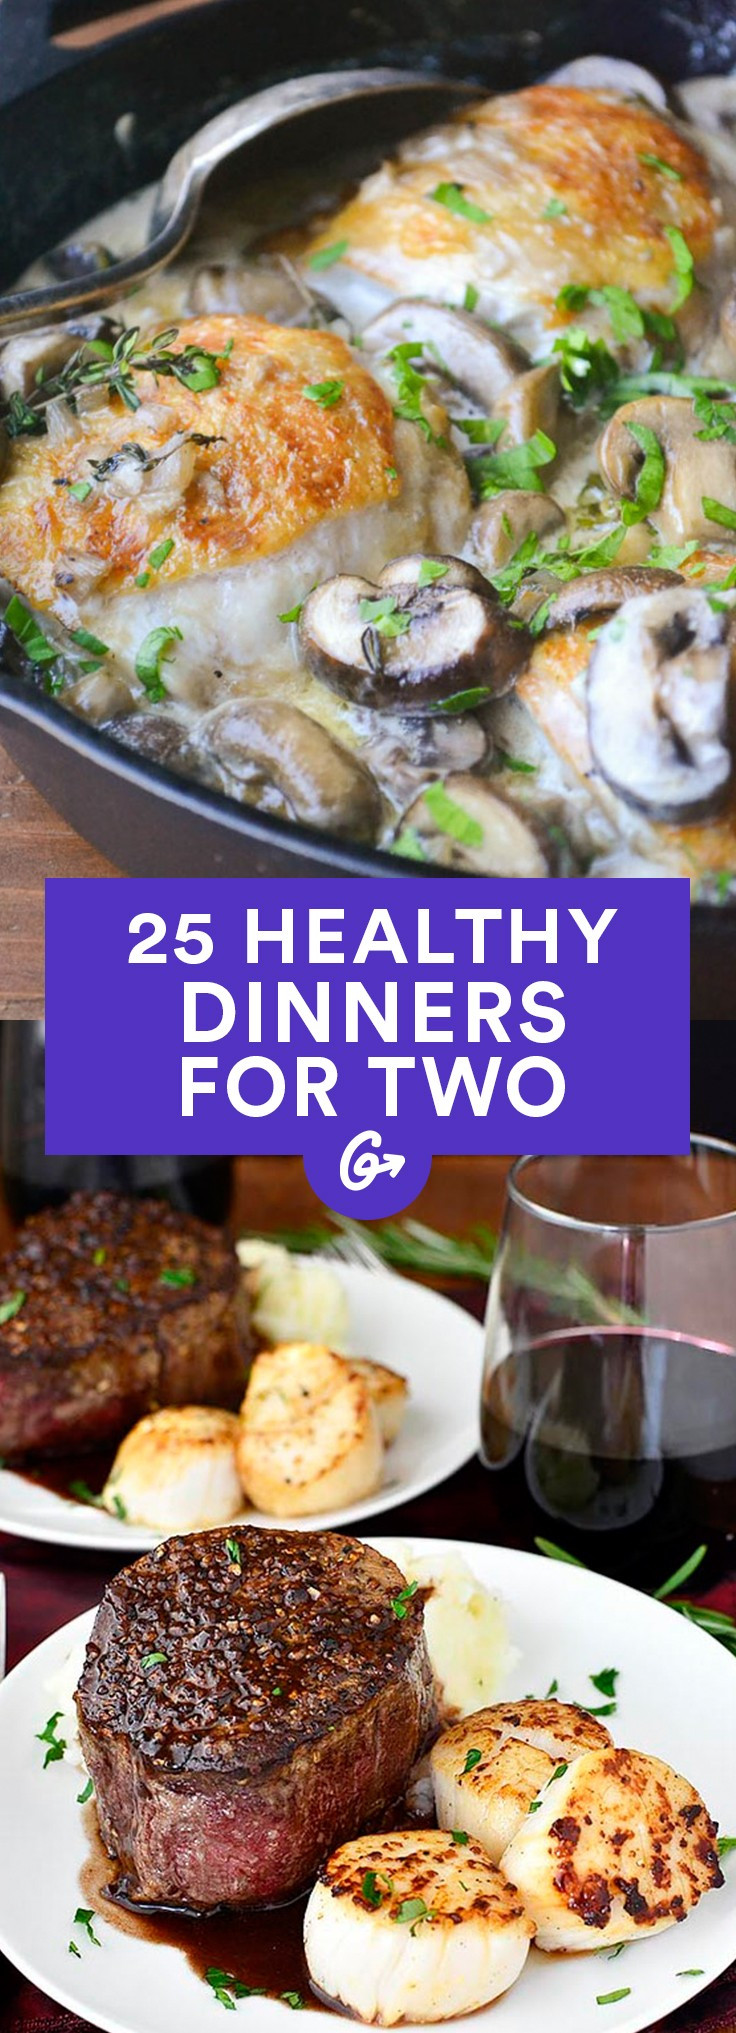 Healthy Meal Ideas For Dinner
 Healthy Dinner Recipes for Two